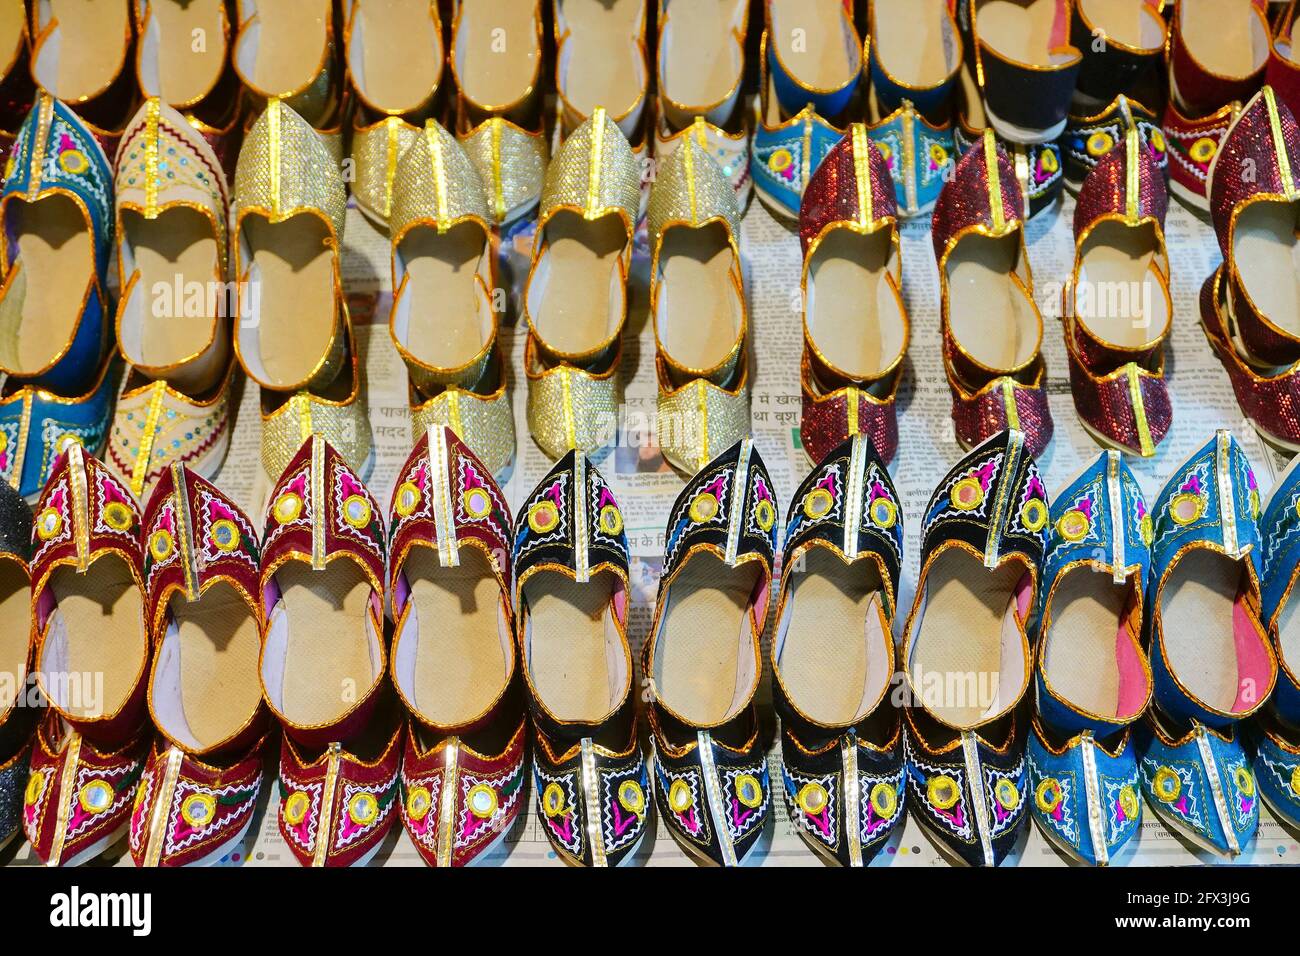 Haridwar, Garhwal, India - 3rd November 2018 : Colourful ladies shoes for sale. Night image of Motibazar, a famous market place for tourists visiting Stock Photo